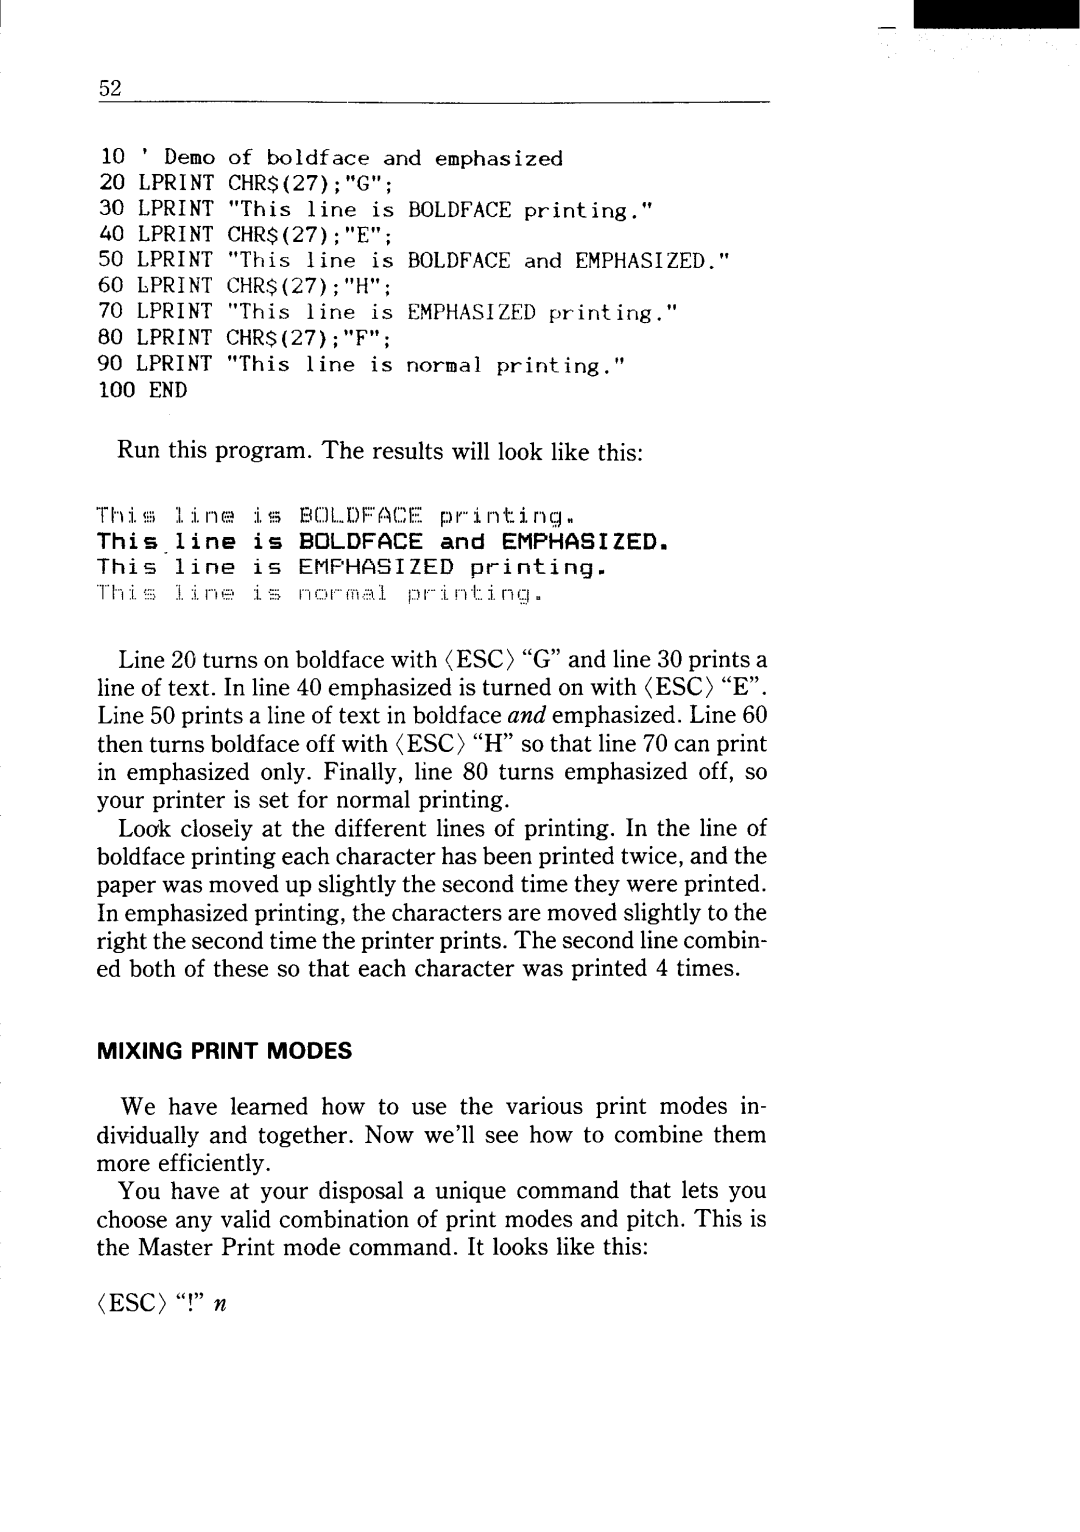 Star Micronics NX-15 user manual 10 ‘ Demo of boldface and emphasized 20 LPRINTCHR$27’’G” 